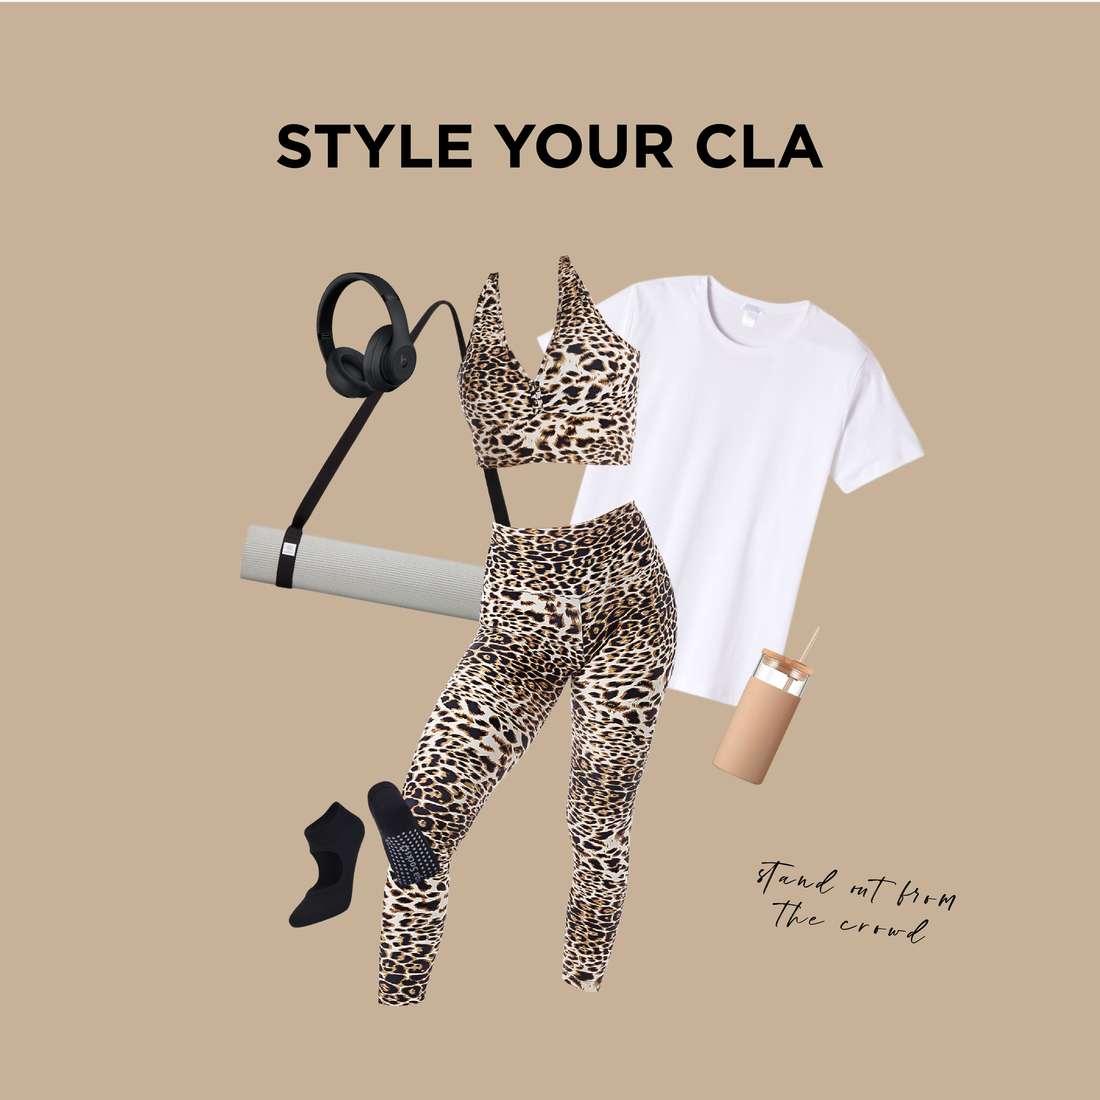 Let’s style your CLA! 🔥